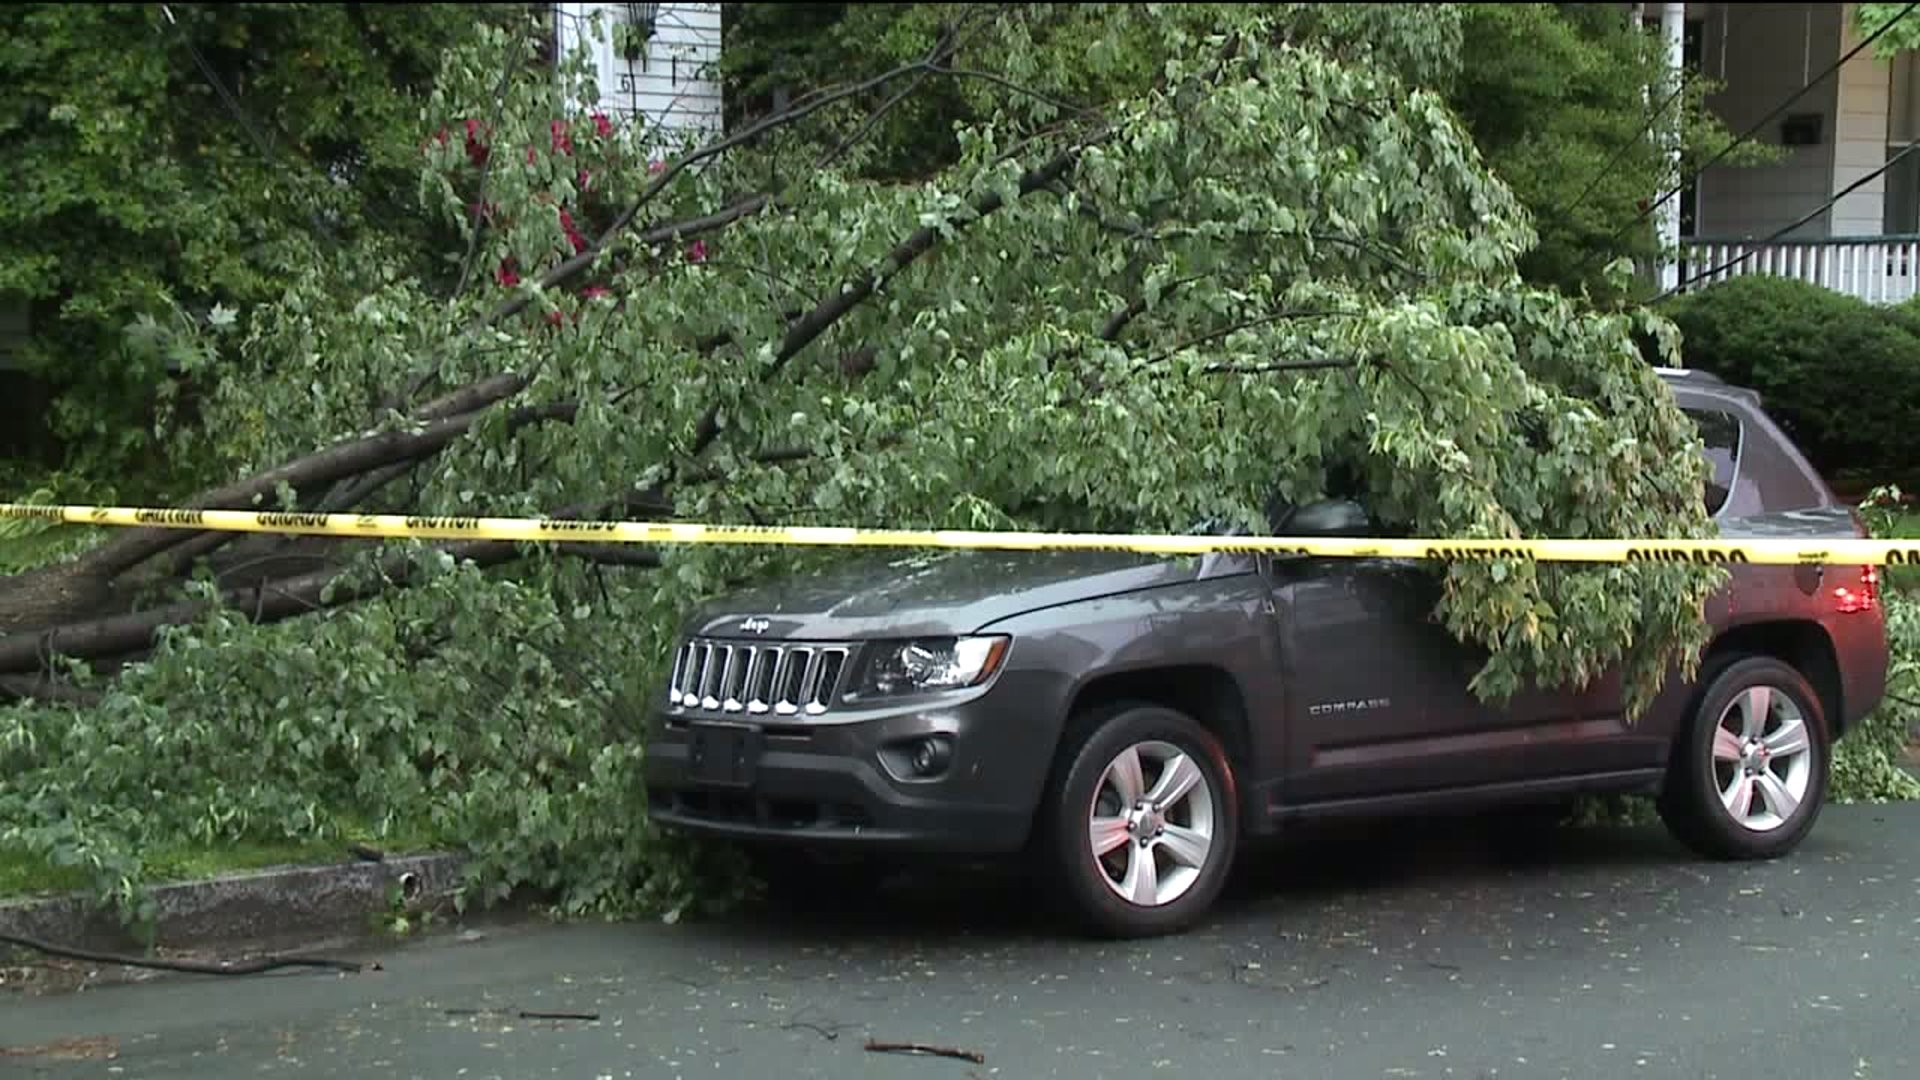 Widespread Destruction Left in Wake of Storms